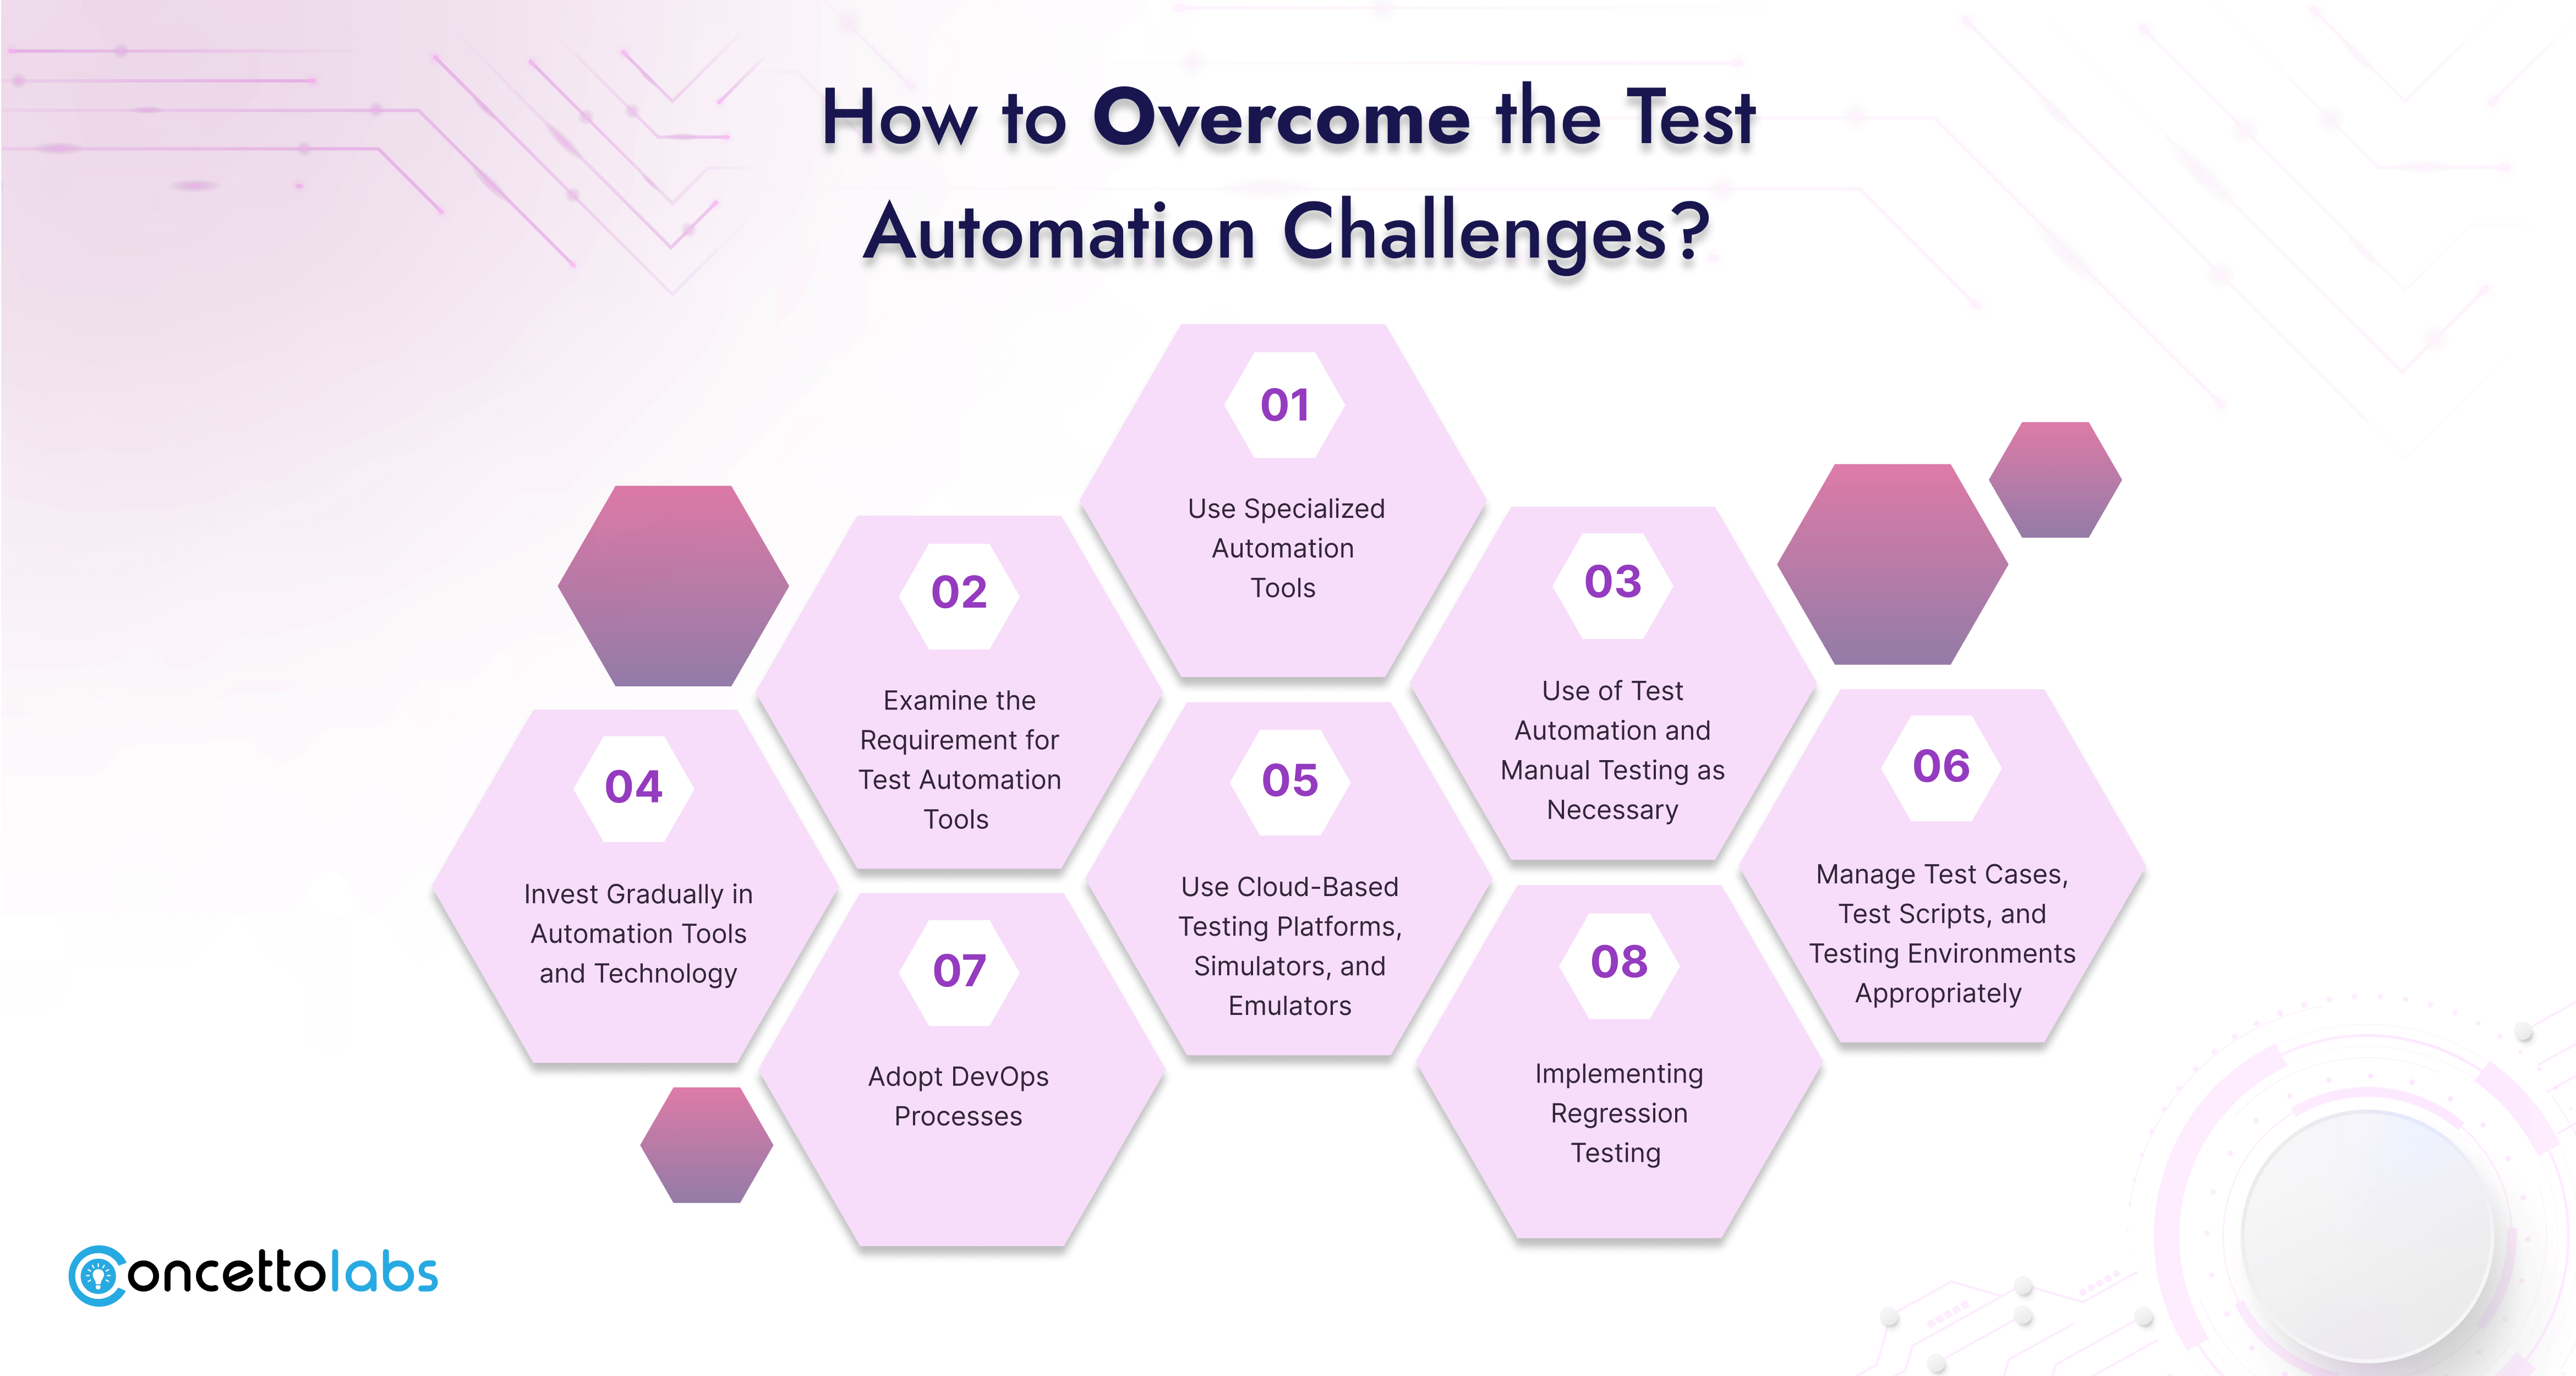 How to Overcome the Test Automation Challenges?